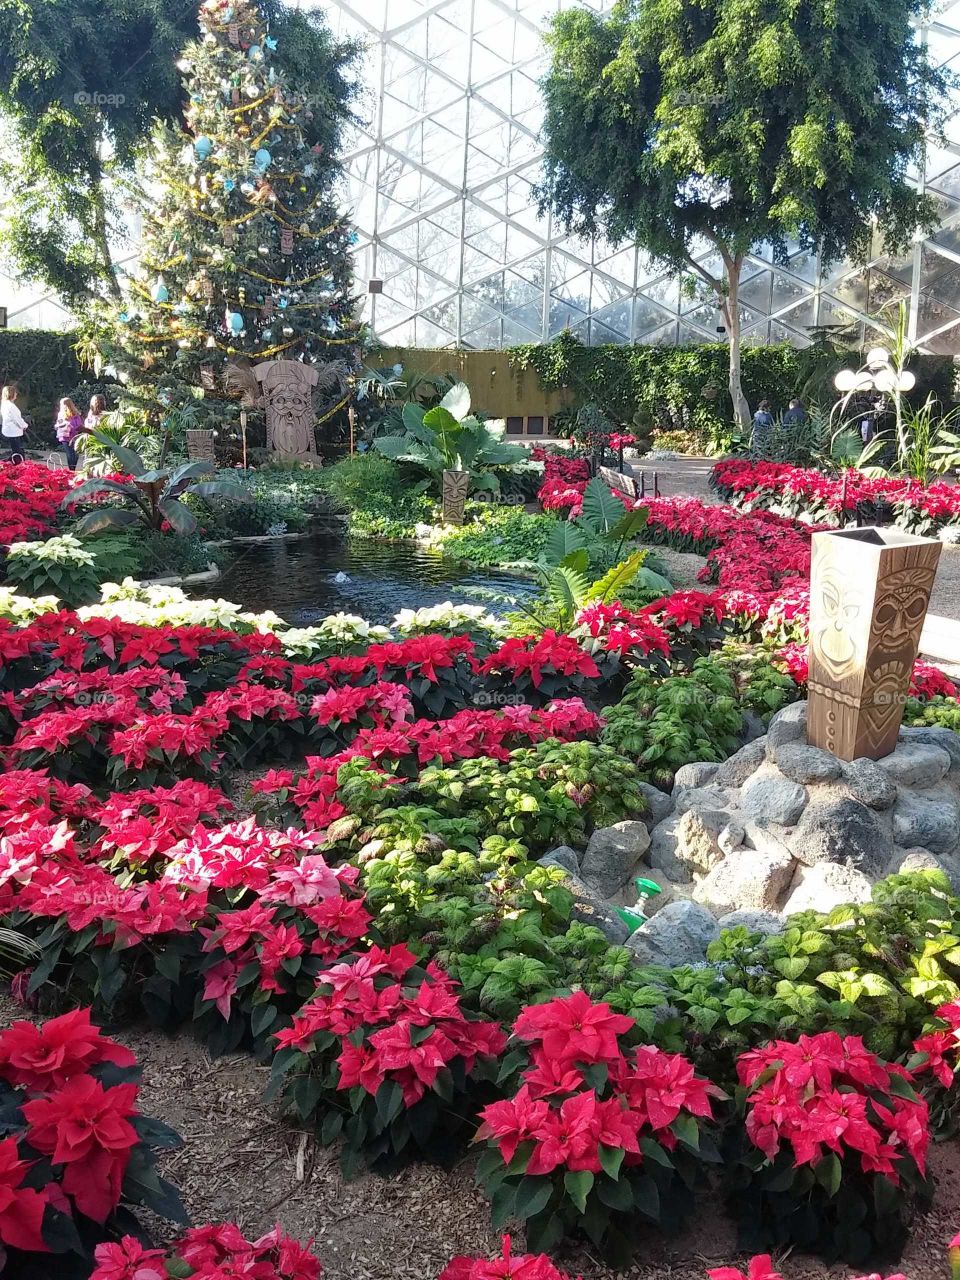 Winter scenery at domes botanical garden